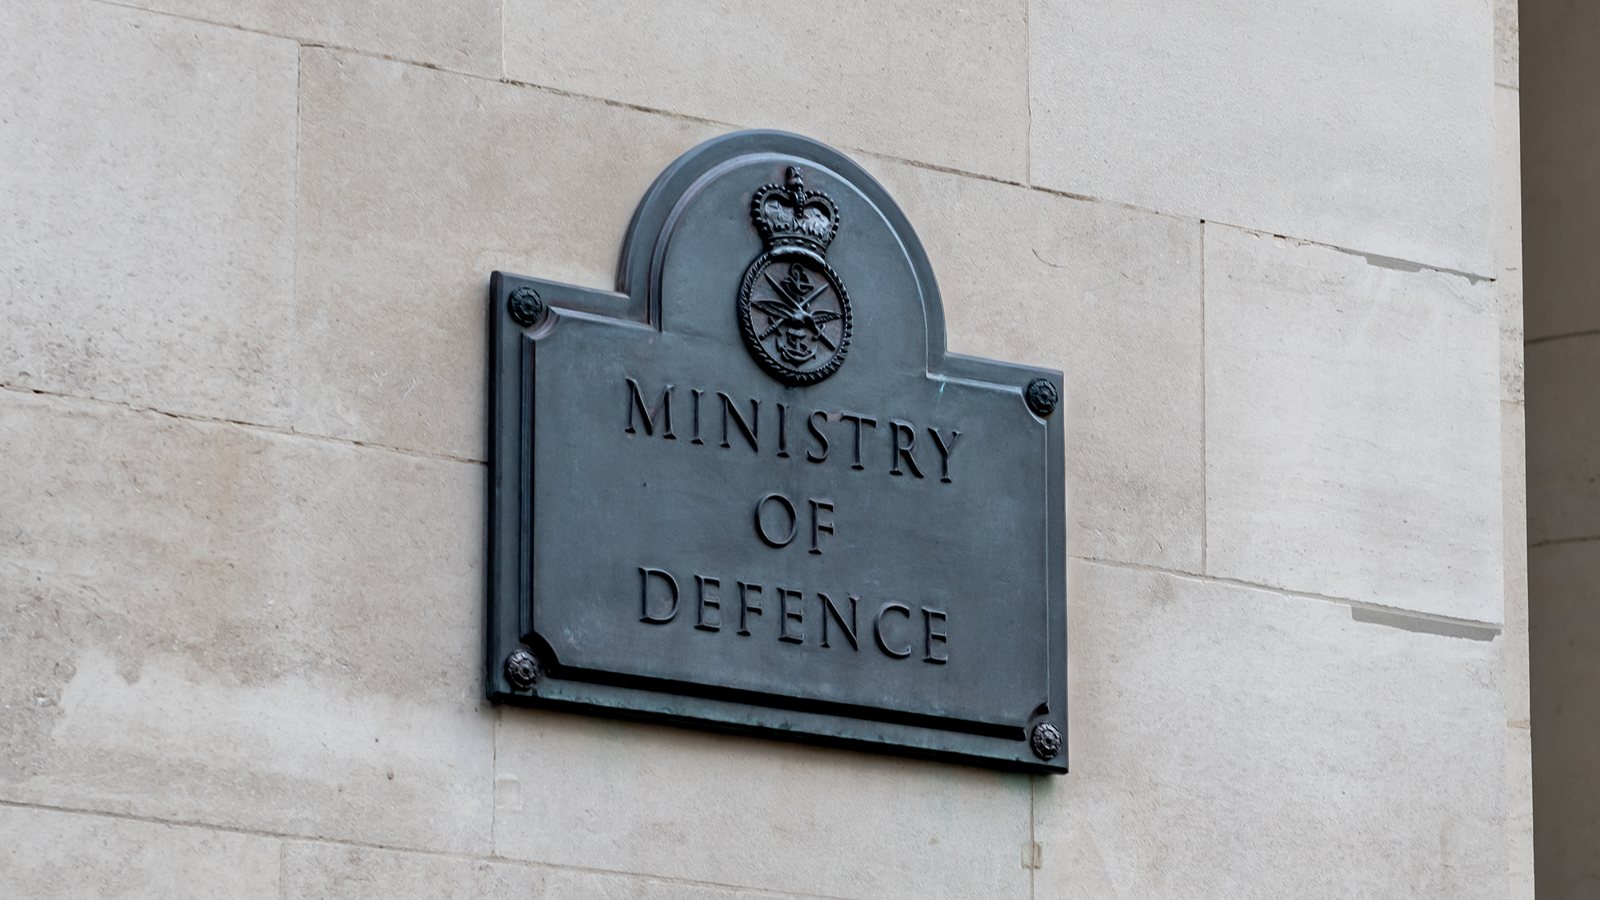 UK confirms Ministry of Defence payroll data exposed in data breach (2 minute read)